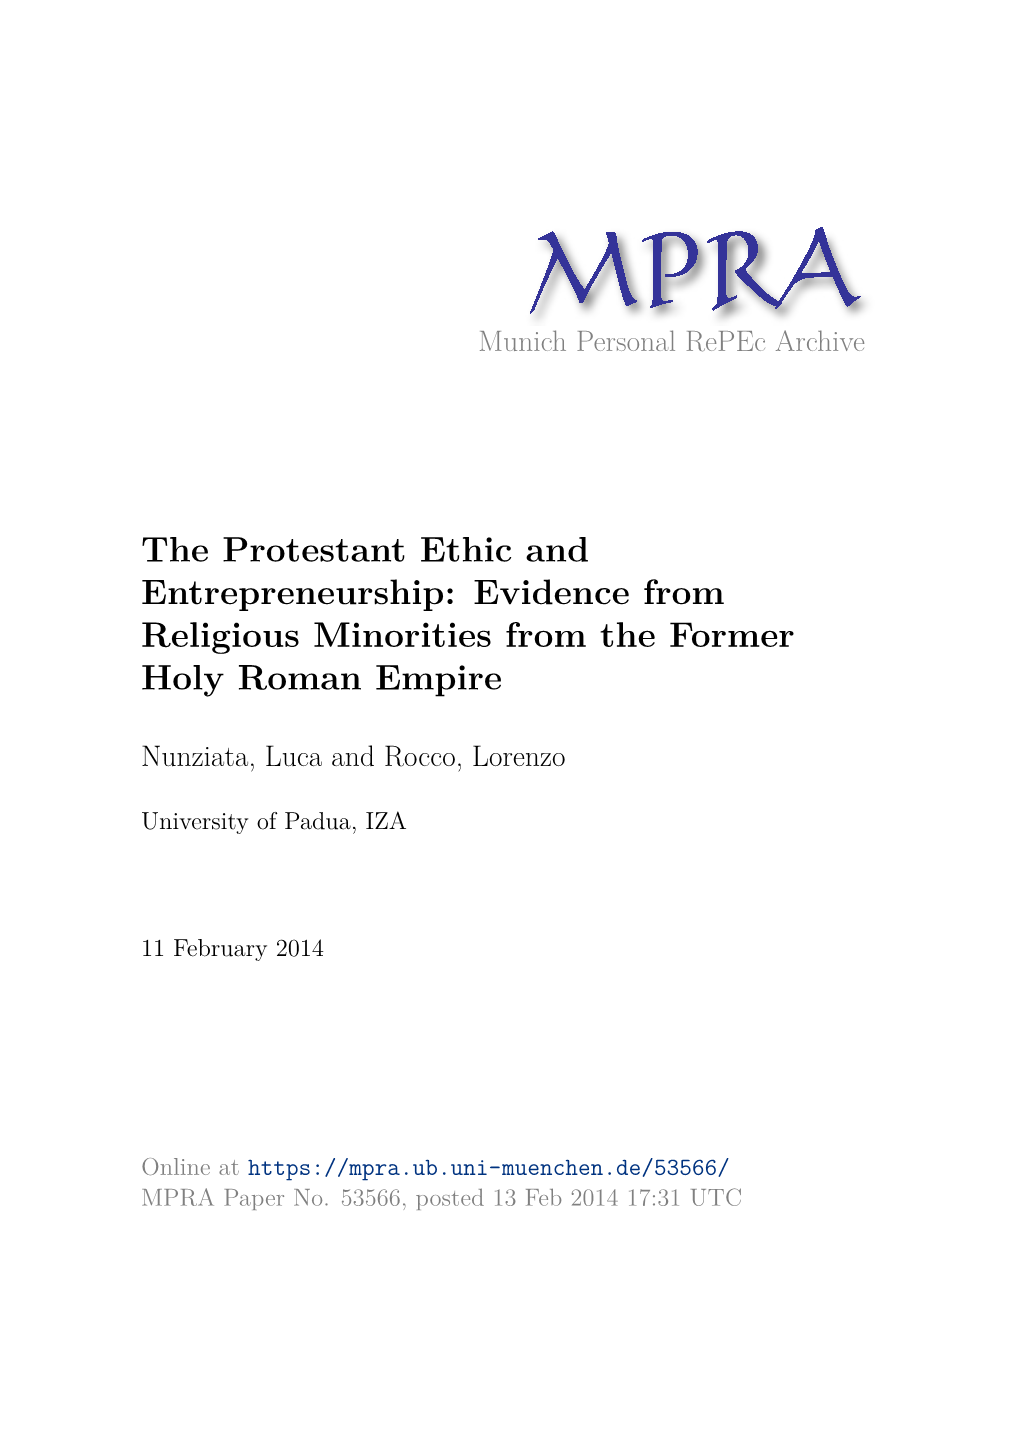 The Protestant Ethic and Entrepreneurship: Evidence from Religious Minorities from the Former Holy Roman Empire